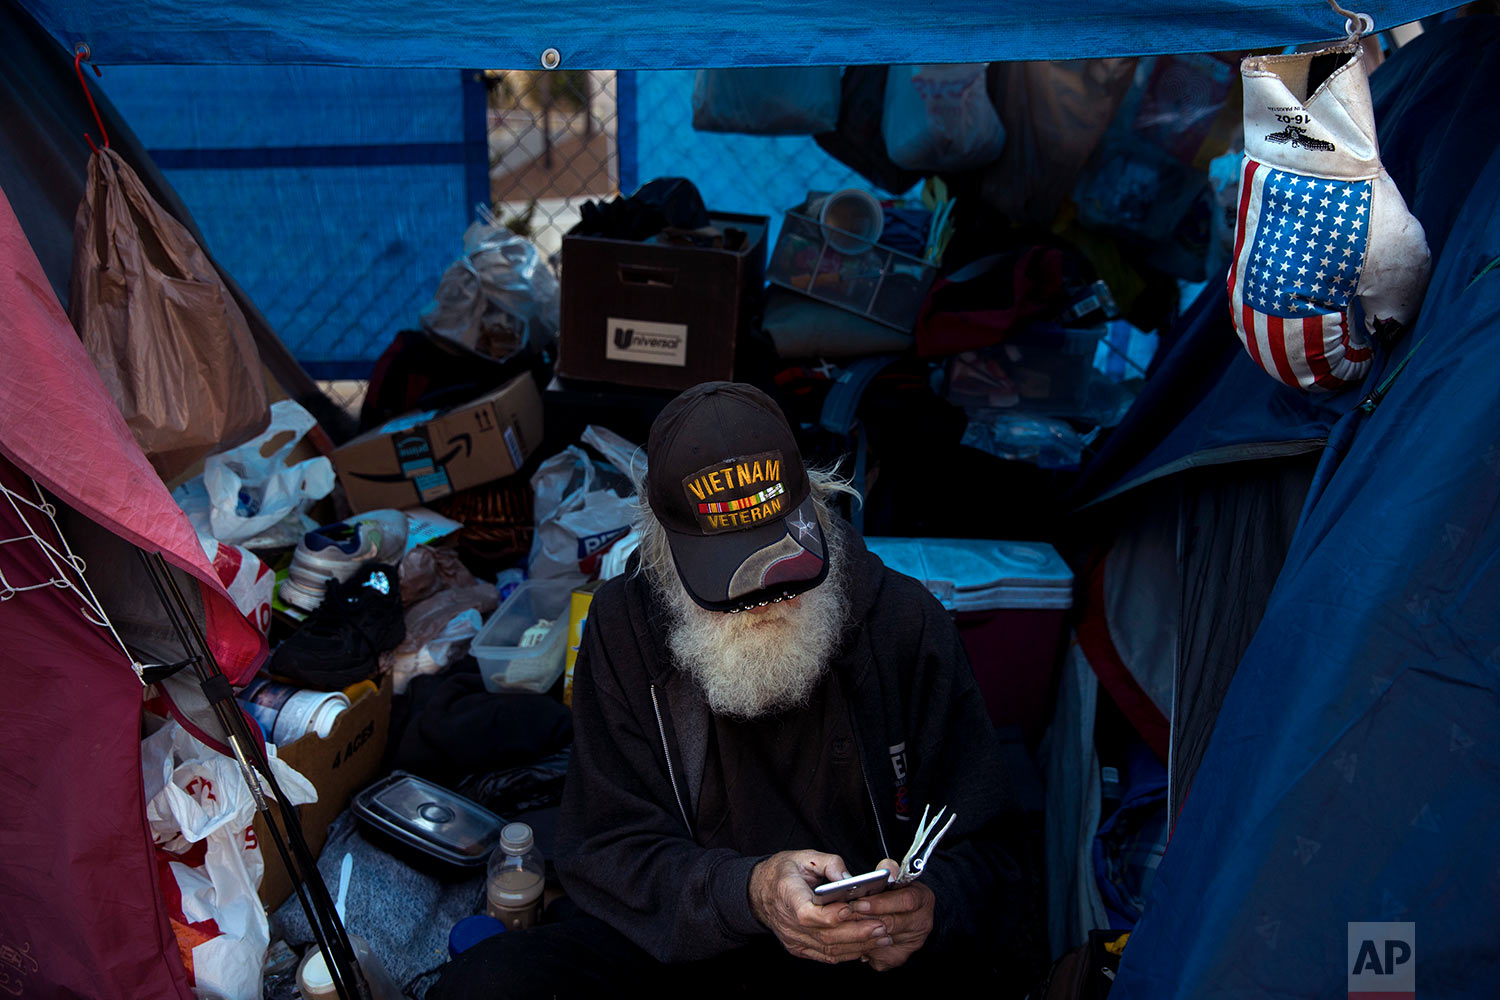  Theodore Neubauer, a 78-year-old Vietnam War veteran, who is homeless, looks at his smartphone while passing time in his tent Friday, Dec. 1, 2017, in Los Angeles. "Well, there's a million-dollar view," said Neubauer on what it's like to be homeless